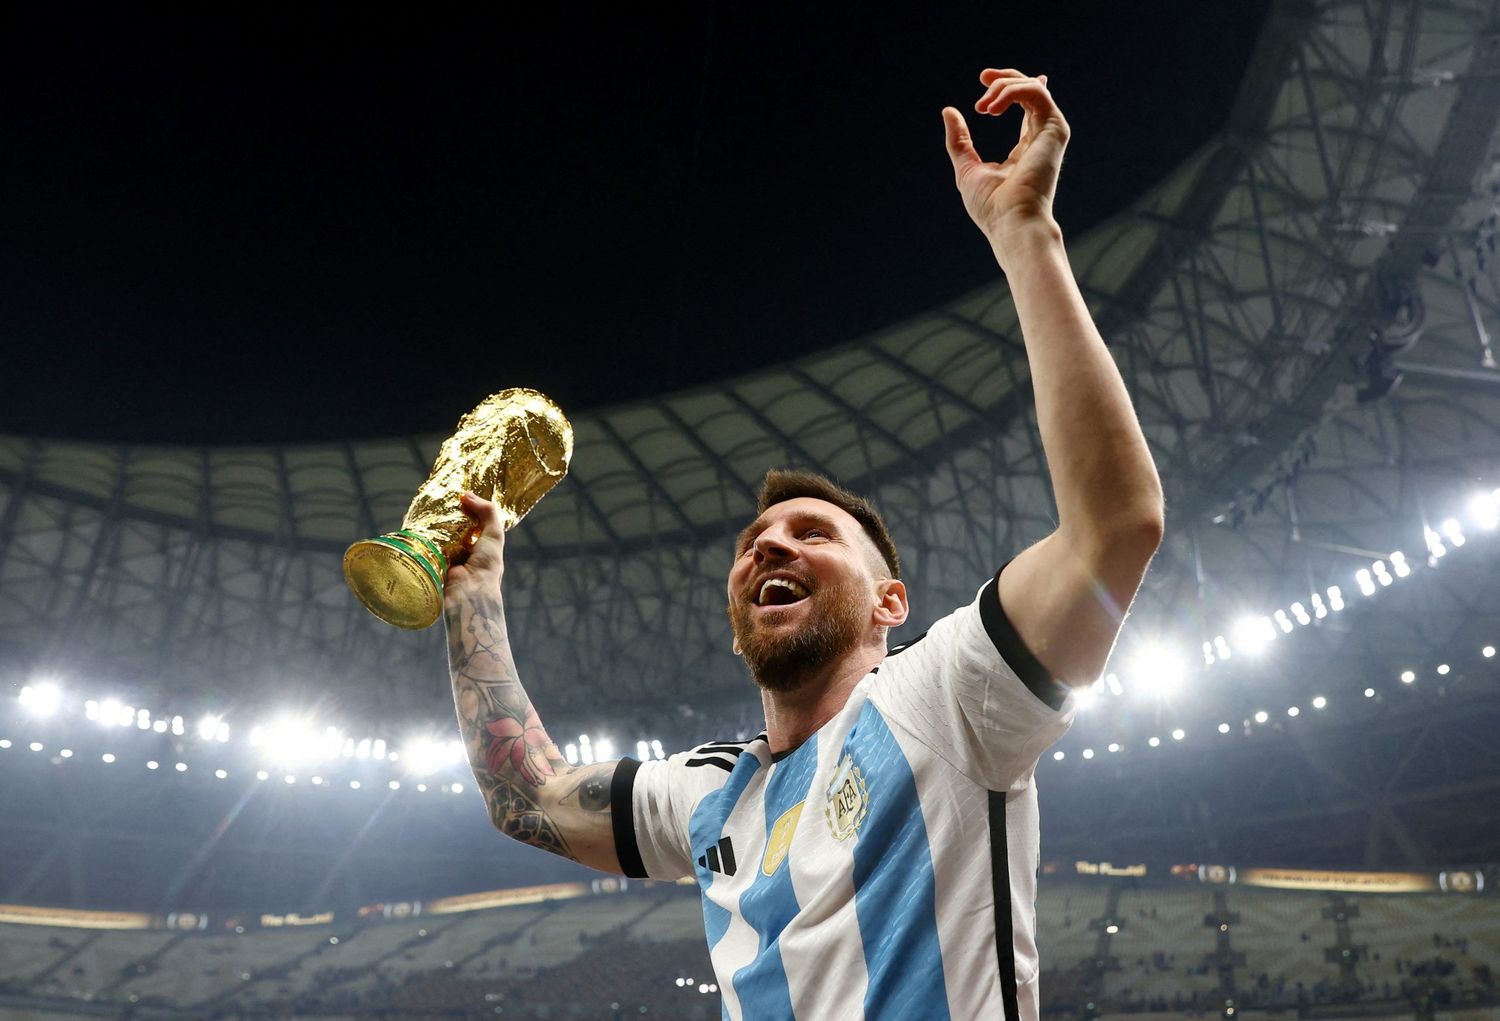 zzzznacd2Soccer Football – FIFA World Cup Qatar 2022 – Final – Argentina v France – Lusail Stadium, Lusail, Qatar – December 18, 2022 Argentina’s Lionel Messi celebrates winning the World Cup with the trophy Foto NA: REUTERS/Hannah Mckay     TPX IMAGES OF THE DAY     zzzz